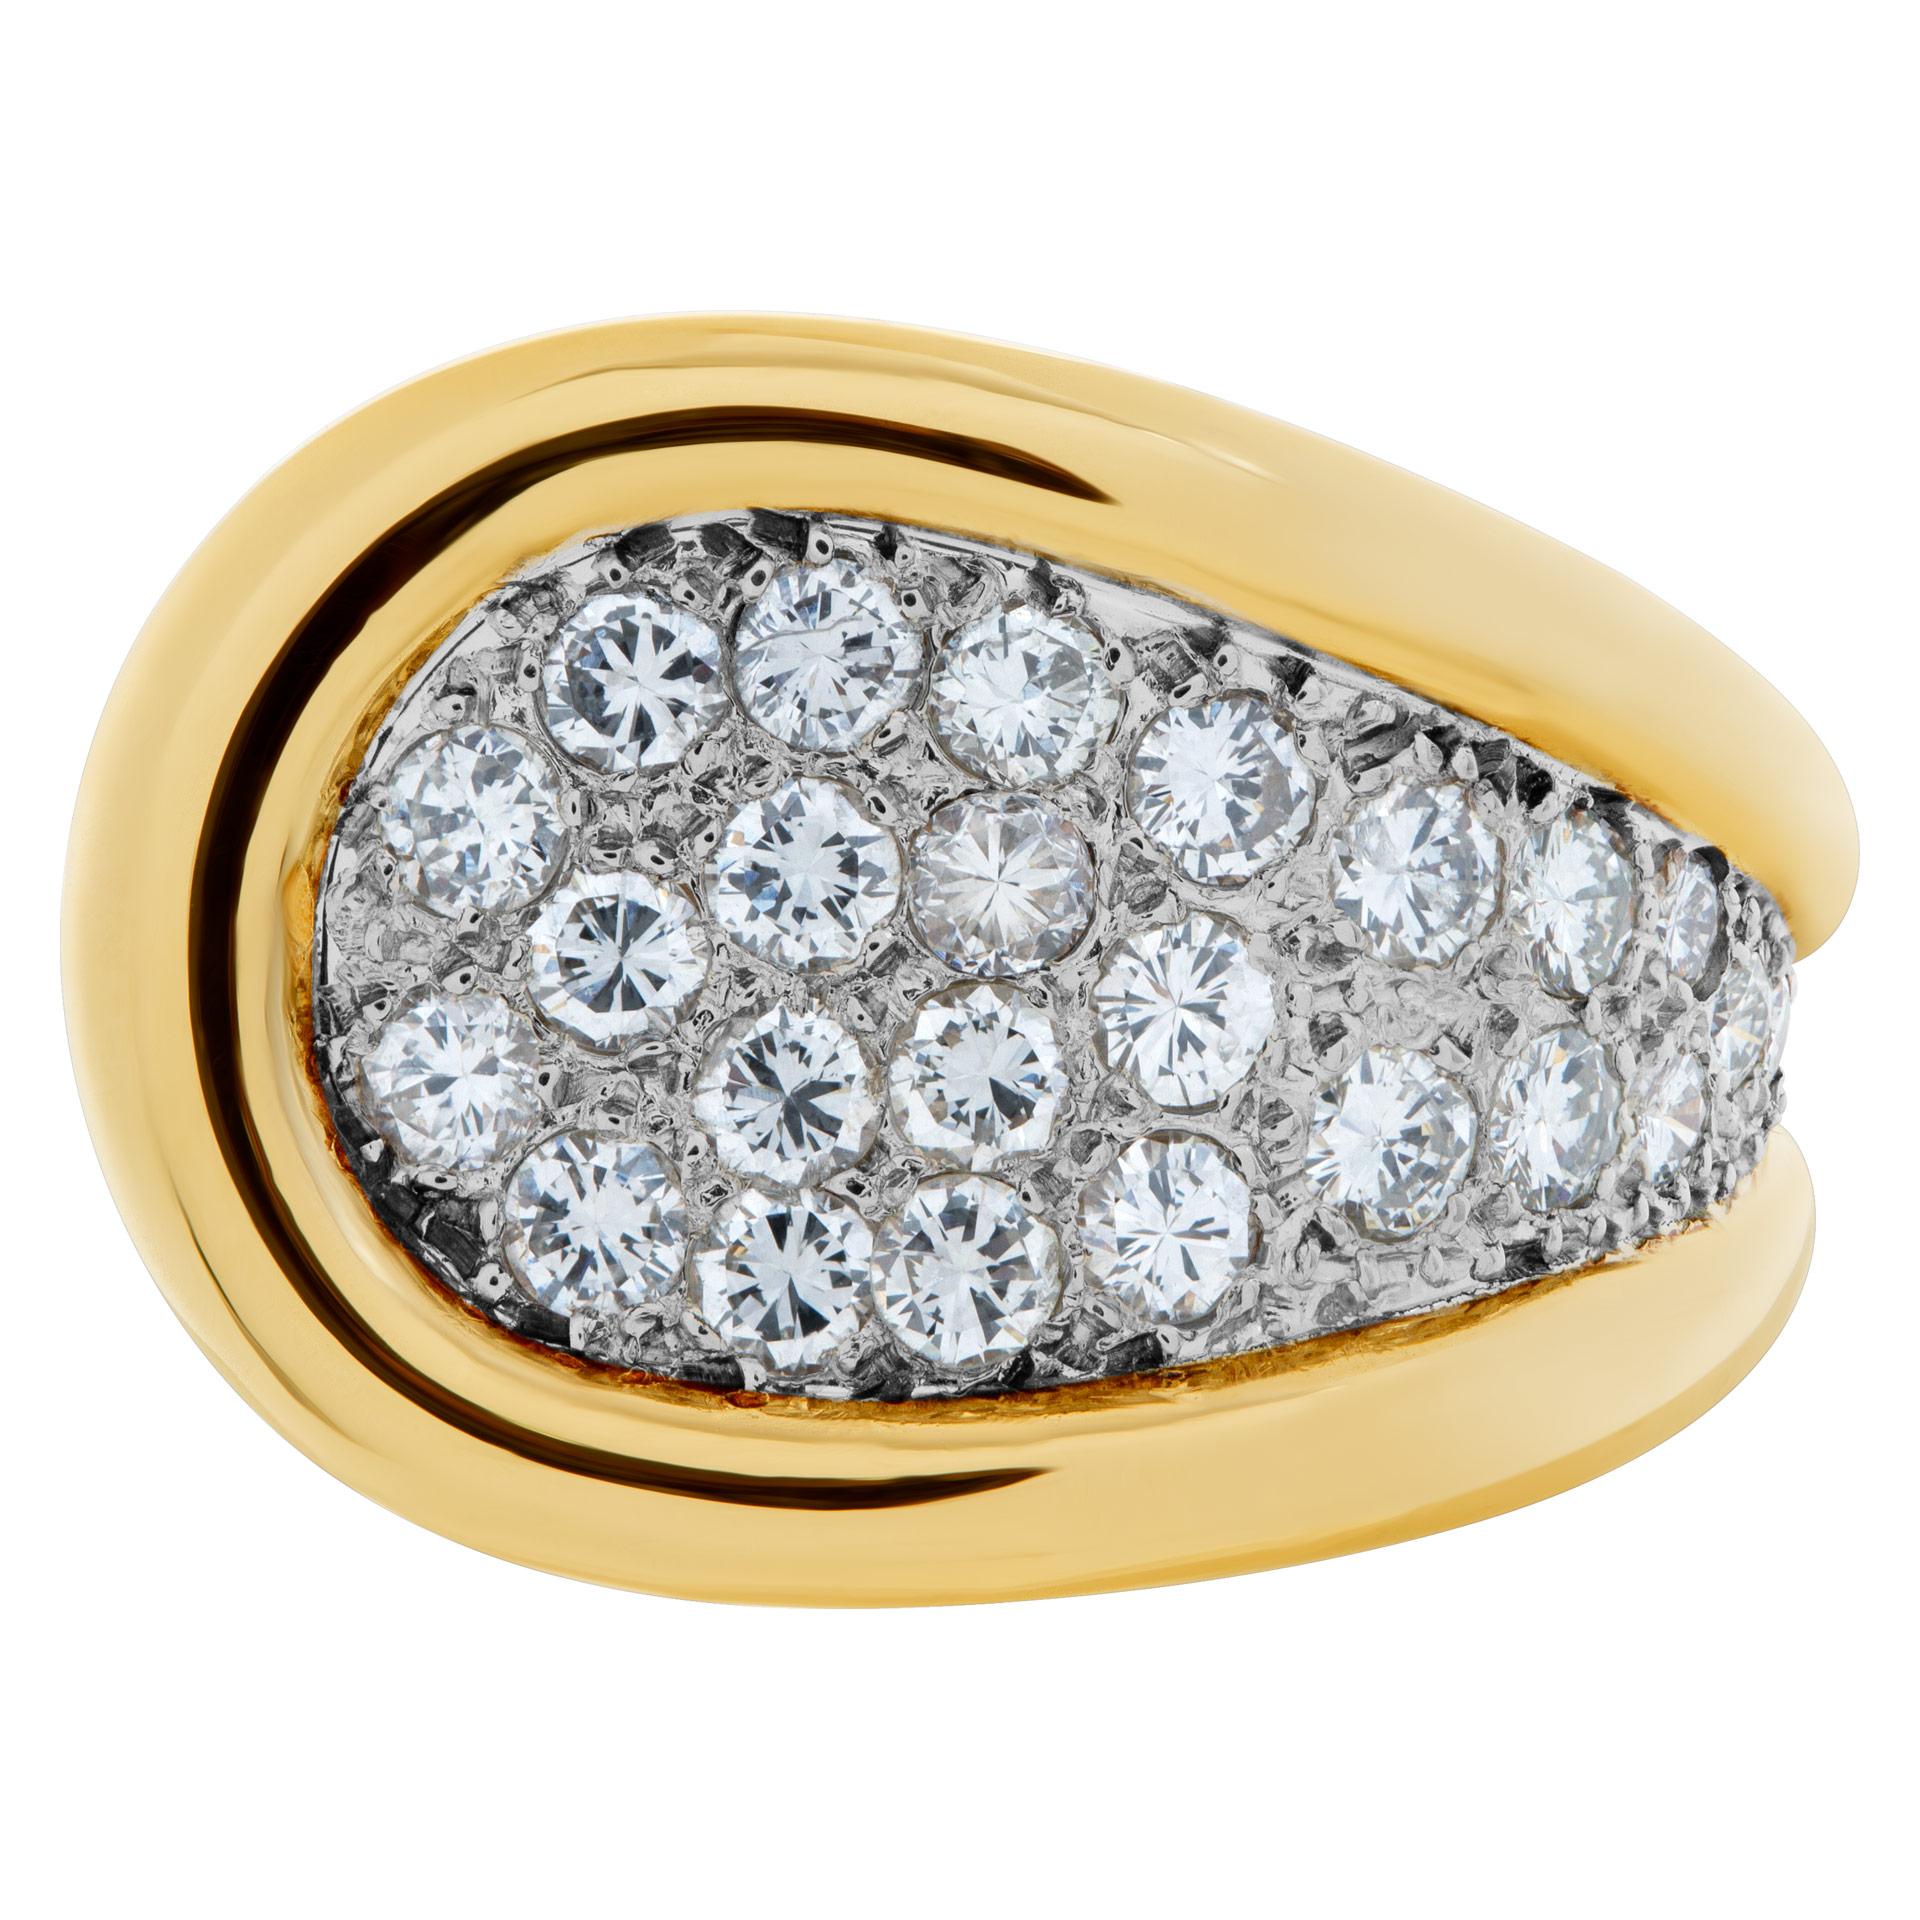 Diamond ring with approximately 2.25 cts in diamonds in 14k yellow gold. Size 5.75  This Diamond ring is currently size 5.75 and some items can be sized up or down, please ask! It weighs 9 pennyweights and is 14k.
